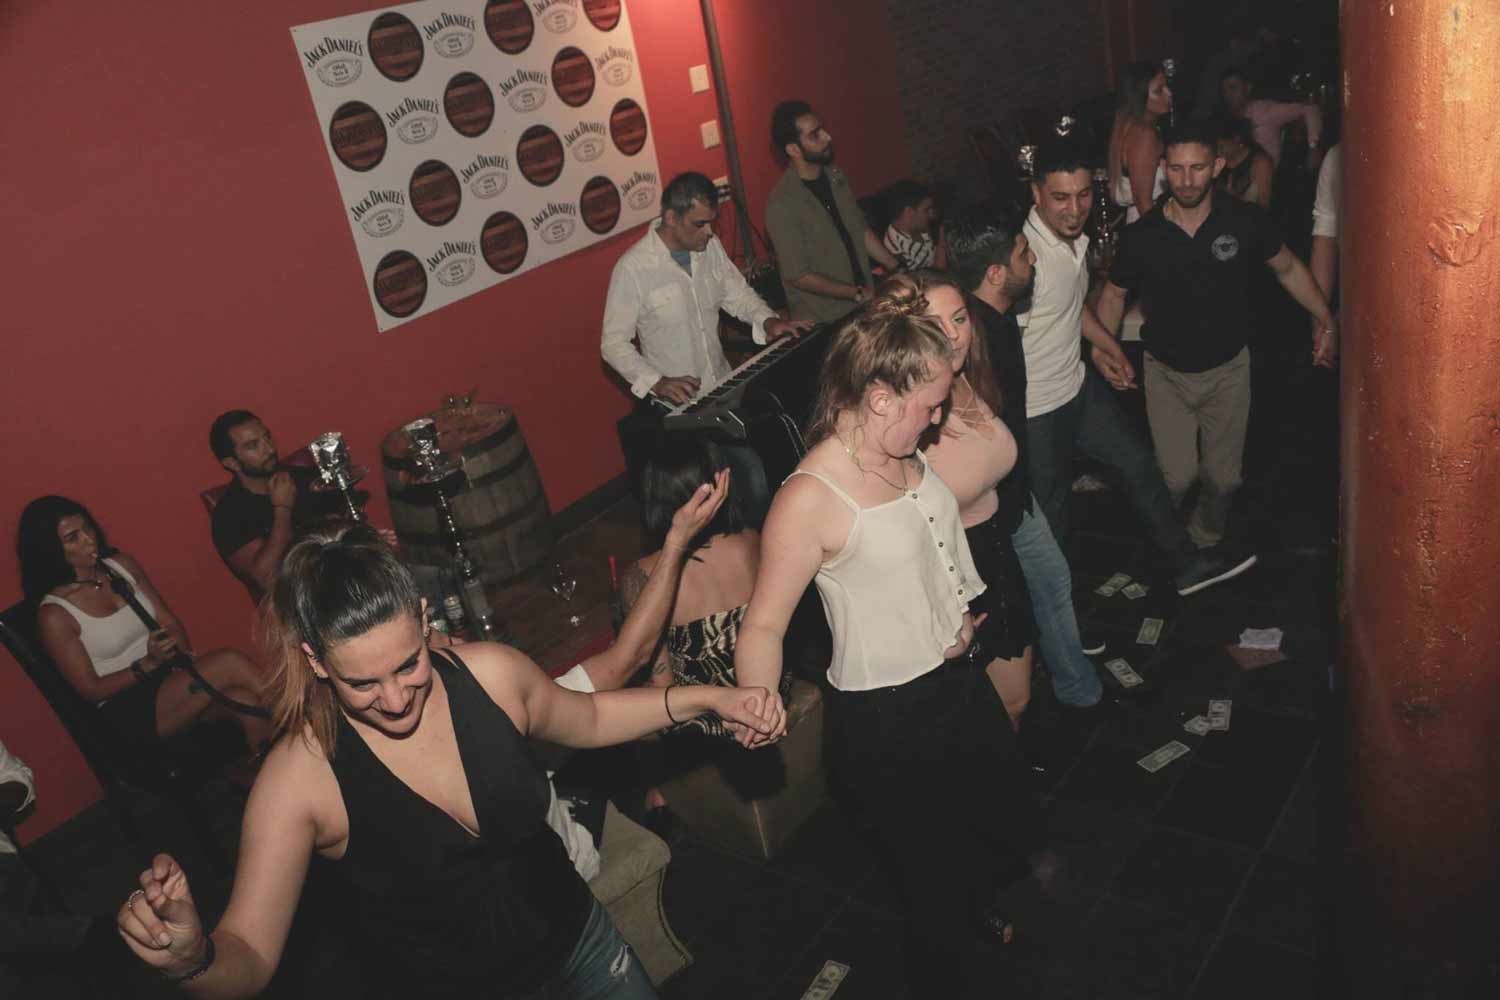 Friends Dancing at Whiskey lounge — Night Out in Worcester, MA